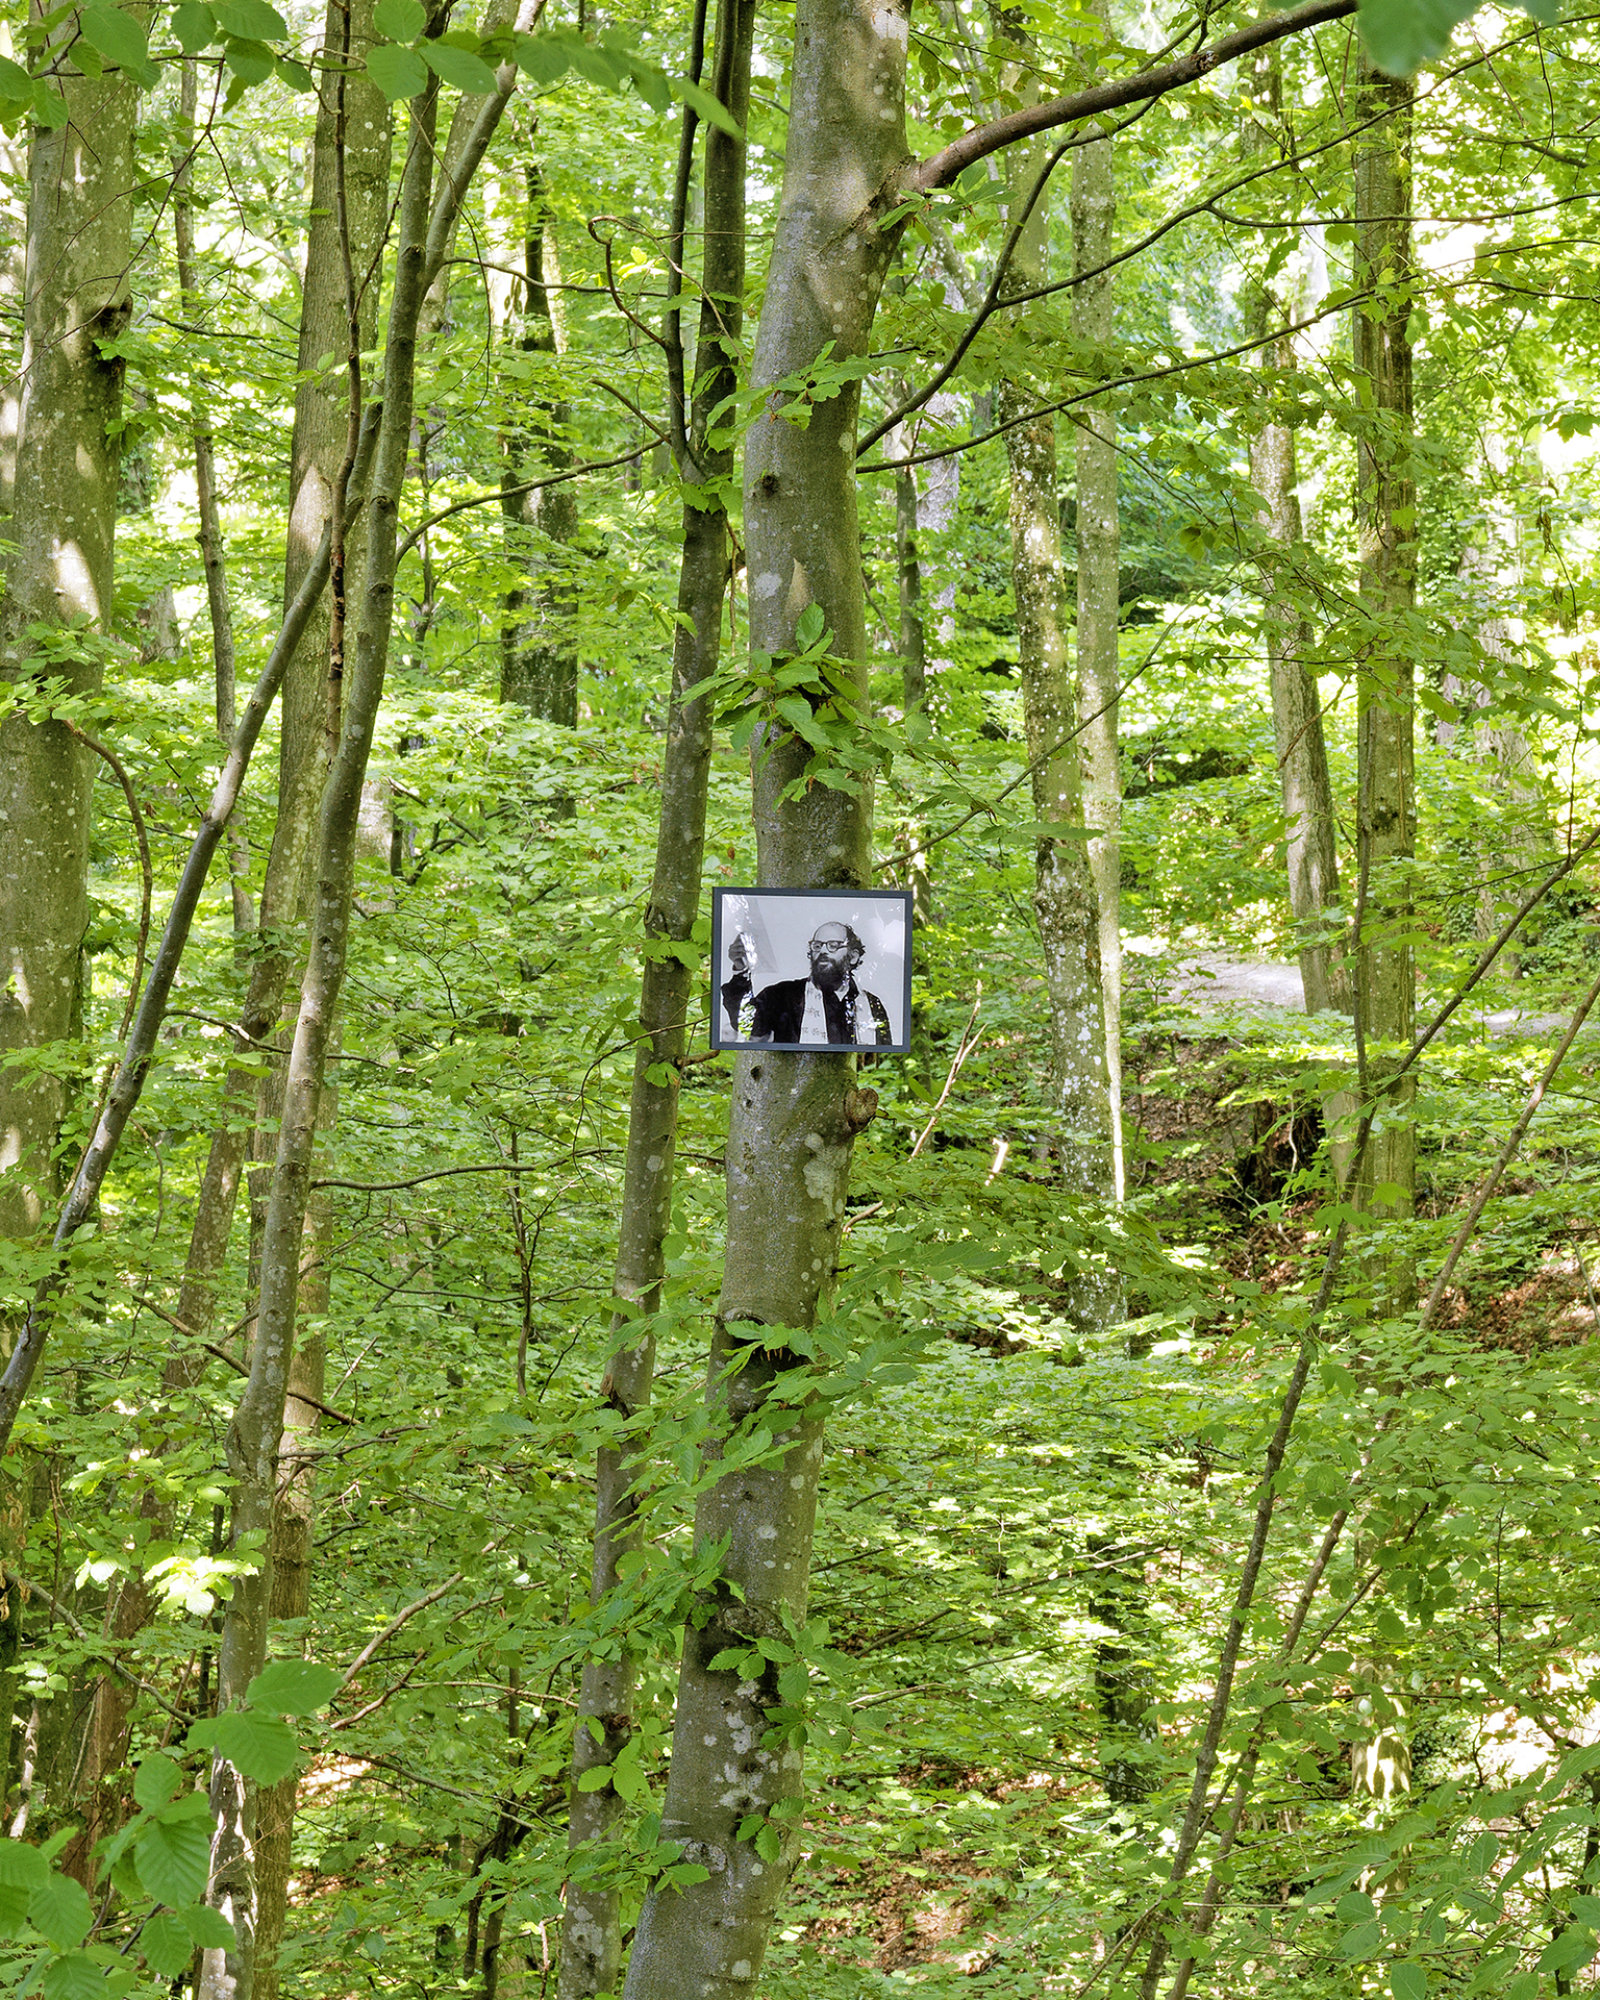 Geoffrey Farmer, If You Want To See Something Look at Something Else (Allen Ginsberg 1926–1997) from The Invisible Worm that Flies in the Night, 2011, 50 colour photographs mounted on perspex, framed, dimensions variable. Installation view, The Garden of Forking Paths, Migros Museum für Gegenwartskunst, Zurich, 2011